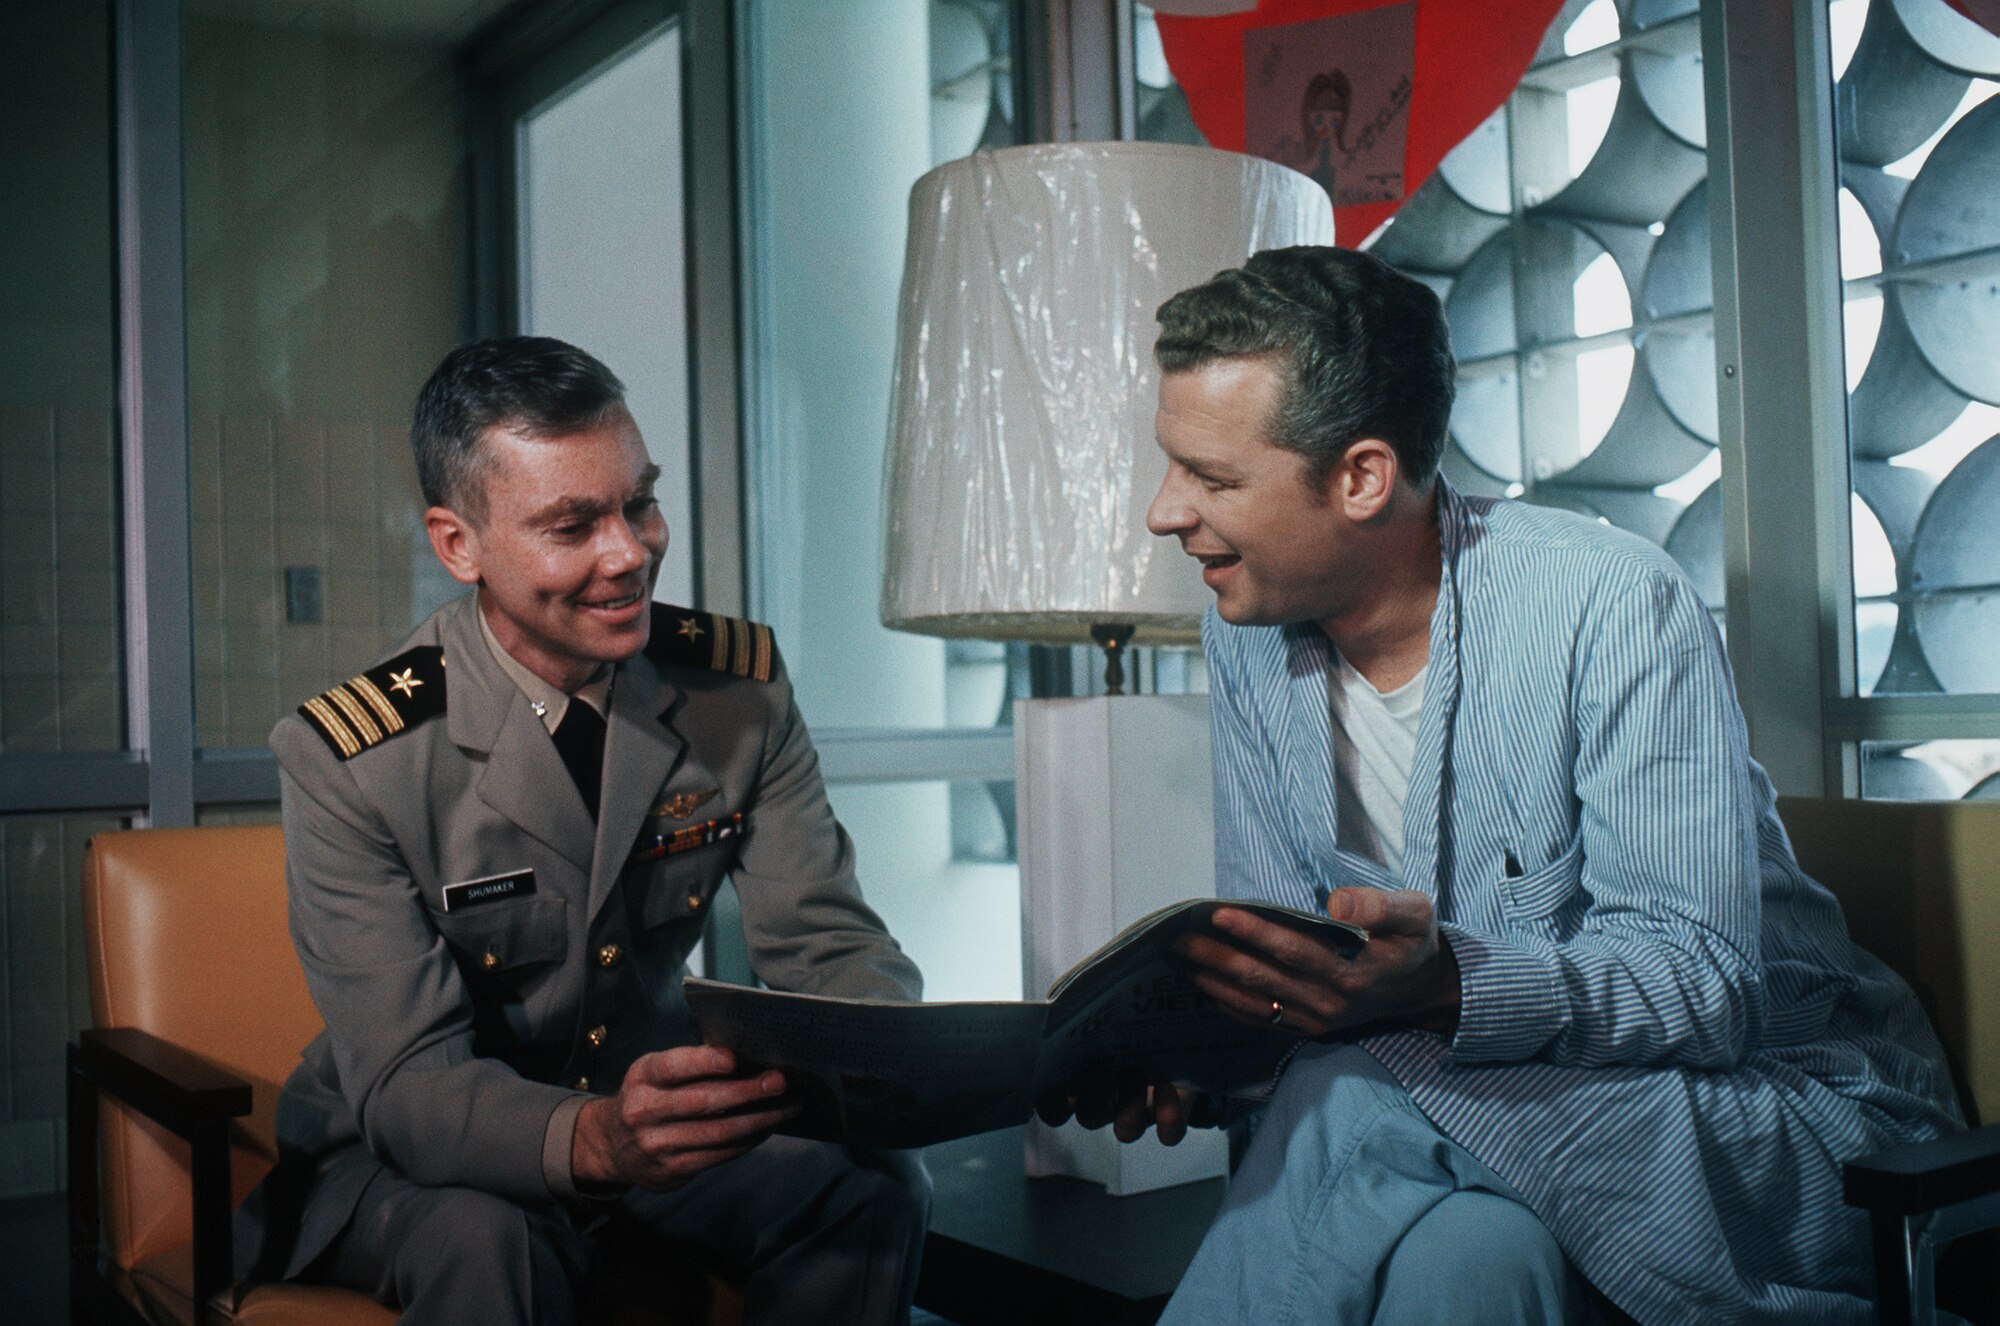 Former POW and U.S. Navy CMDR Robert Harper Shumaker (Captured 11 Feb 65) shares a magazine with fellow ex-POW U.S. Navy LCMDR Phillip Neal Butler (Captured 20 Apr 65) in the hospital reading lounge.  CMDR Shumaker and LCMDR Butler were released by the North Vietnamese in Hanoi on 12 Feb 73. (DoD Photo)